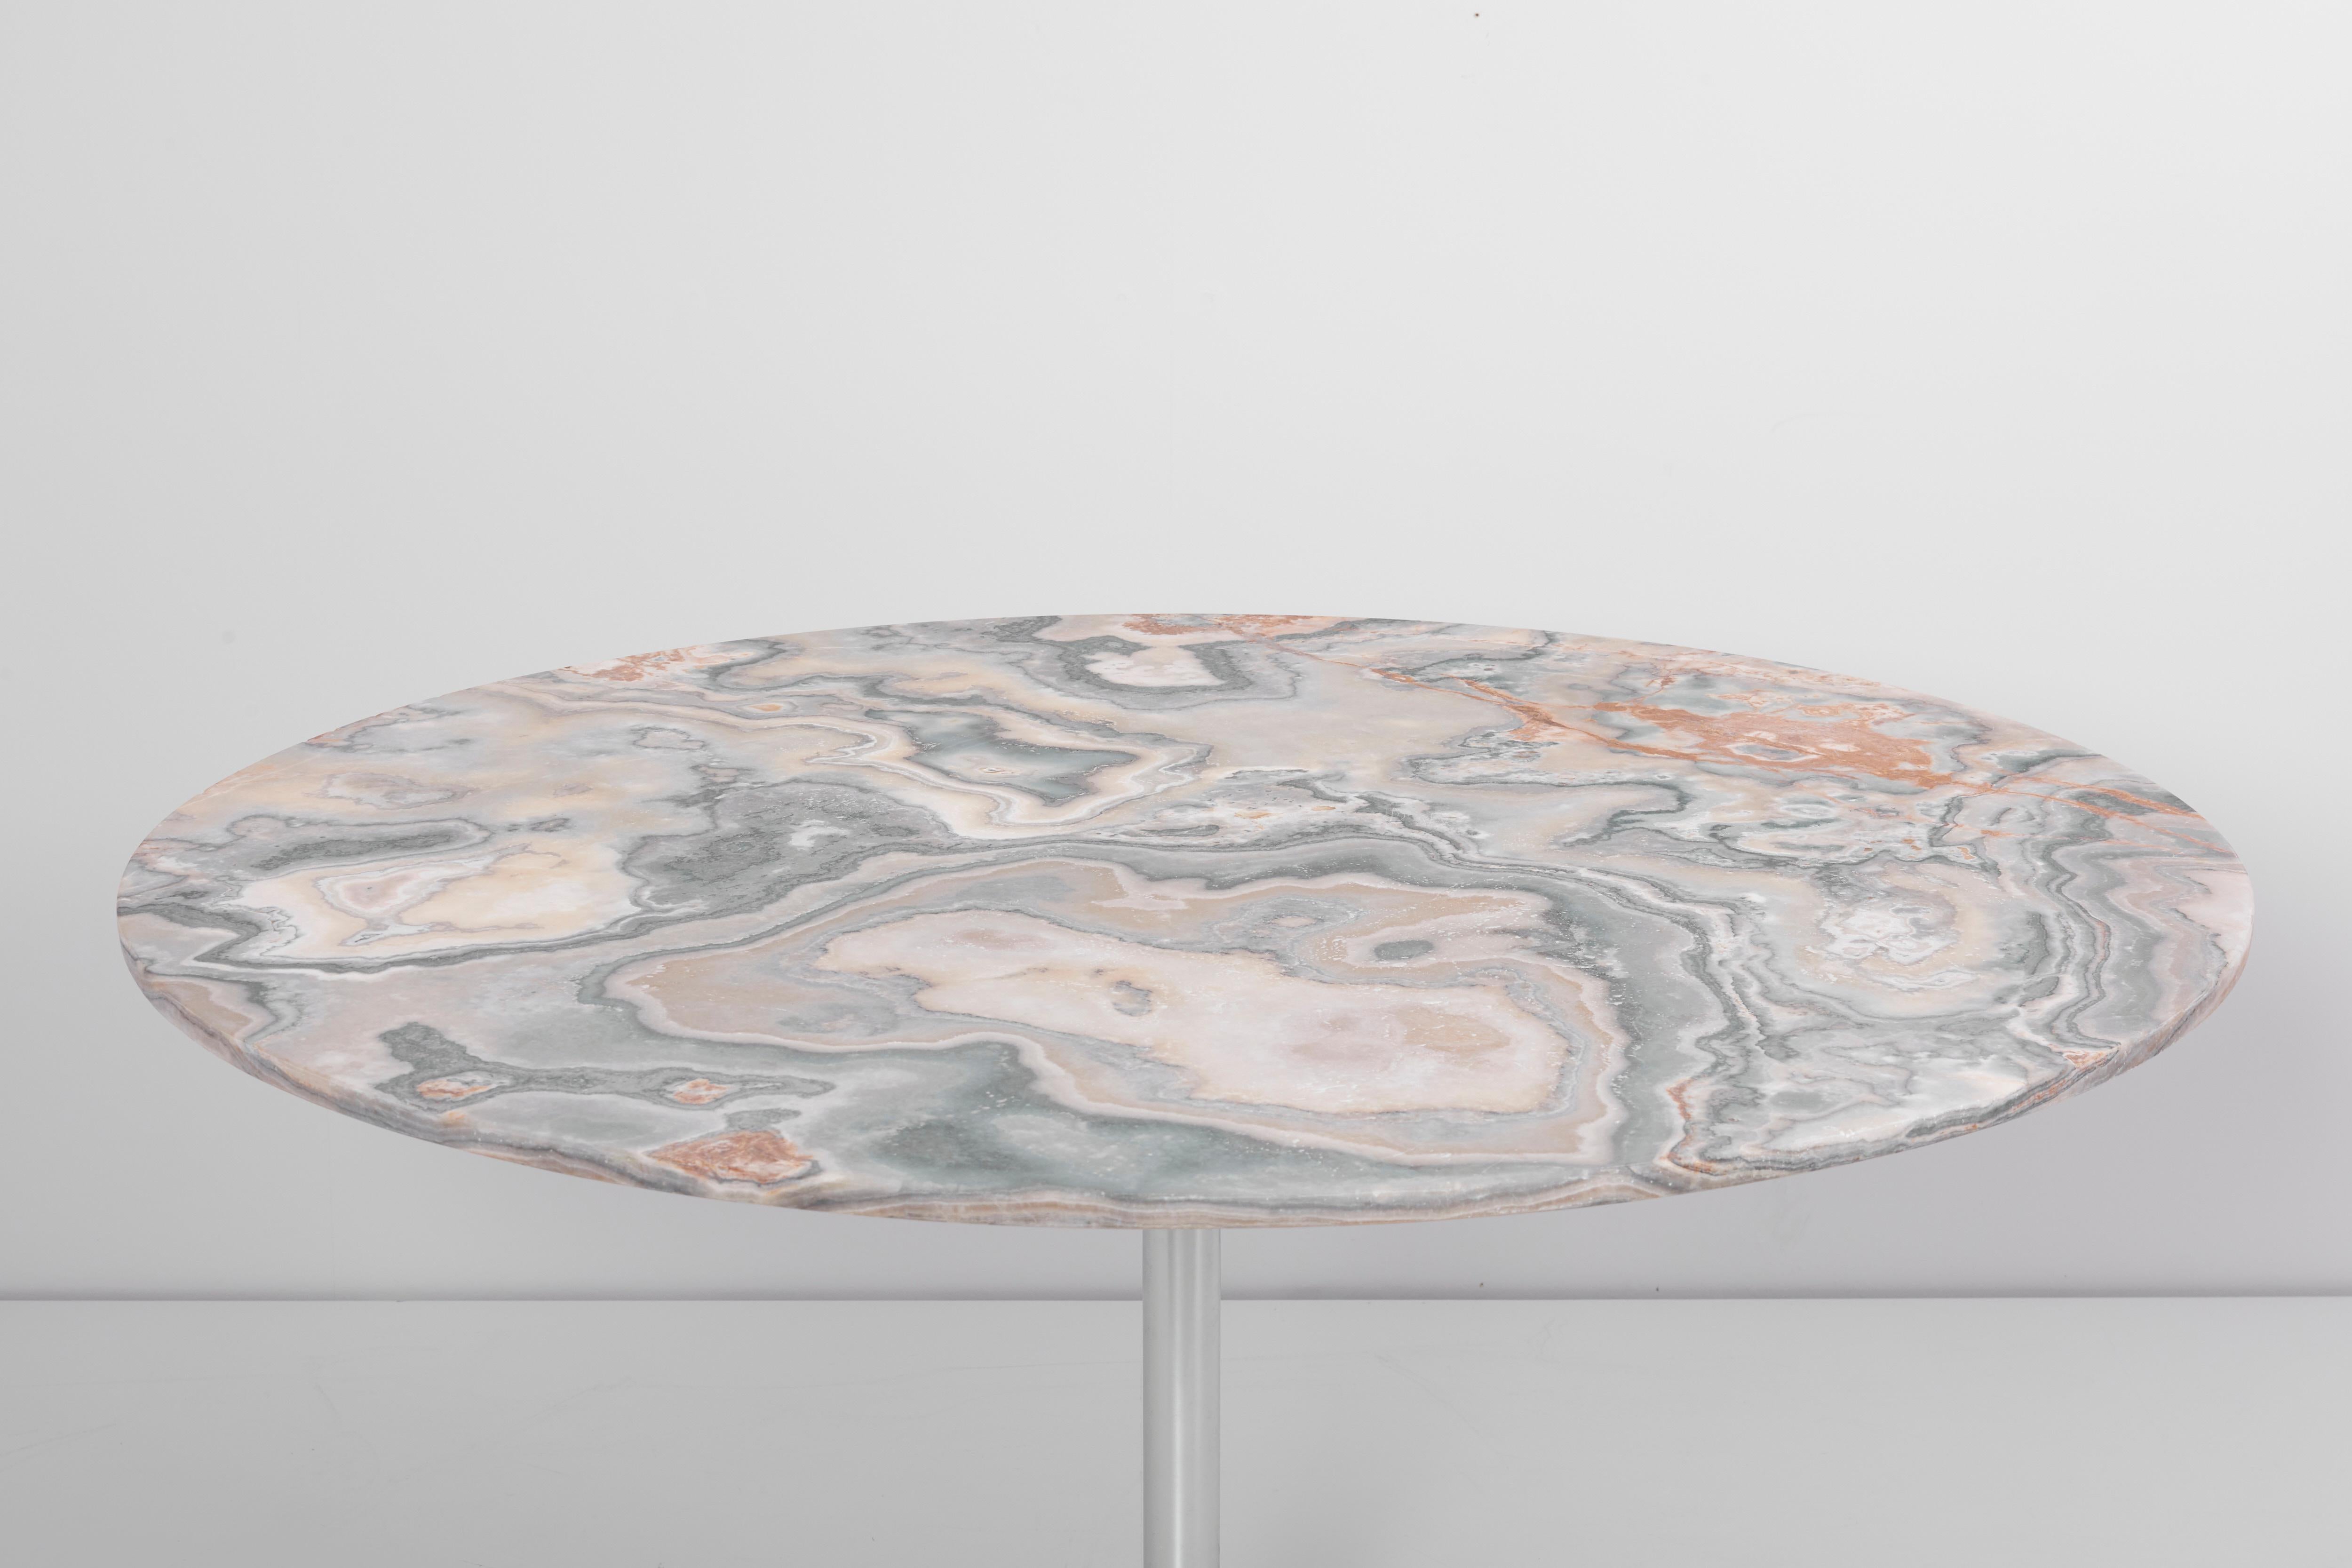 Space Age Round Marble Dining Table by Horst Brüning for Cor, Germany - 1970s